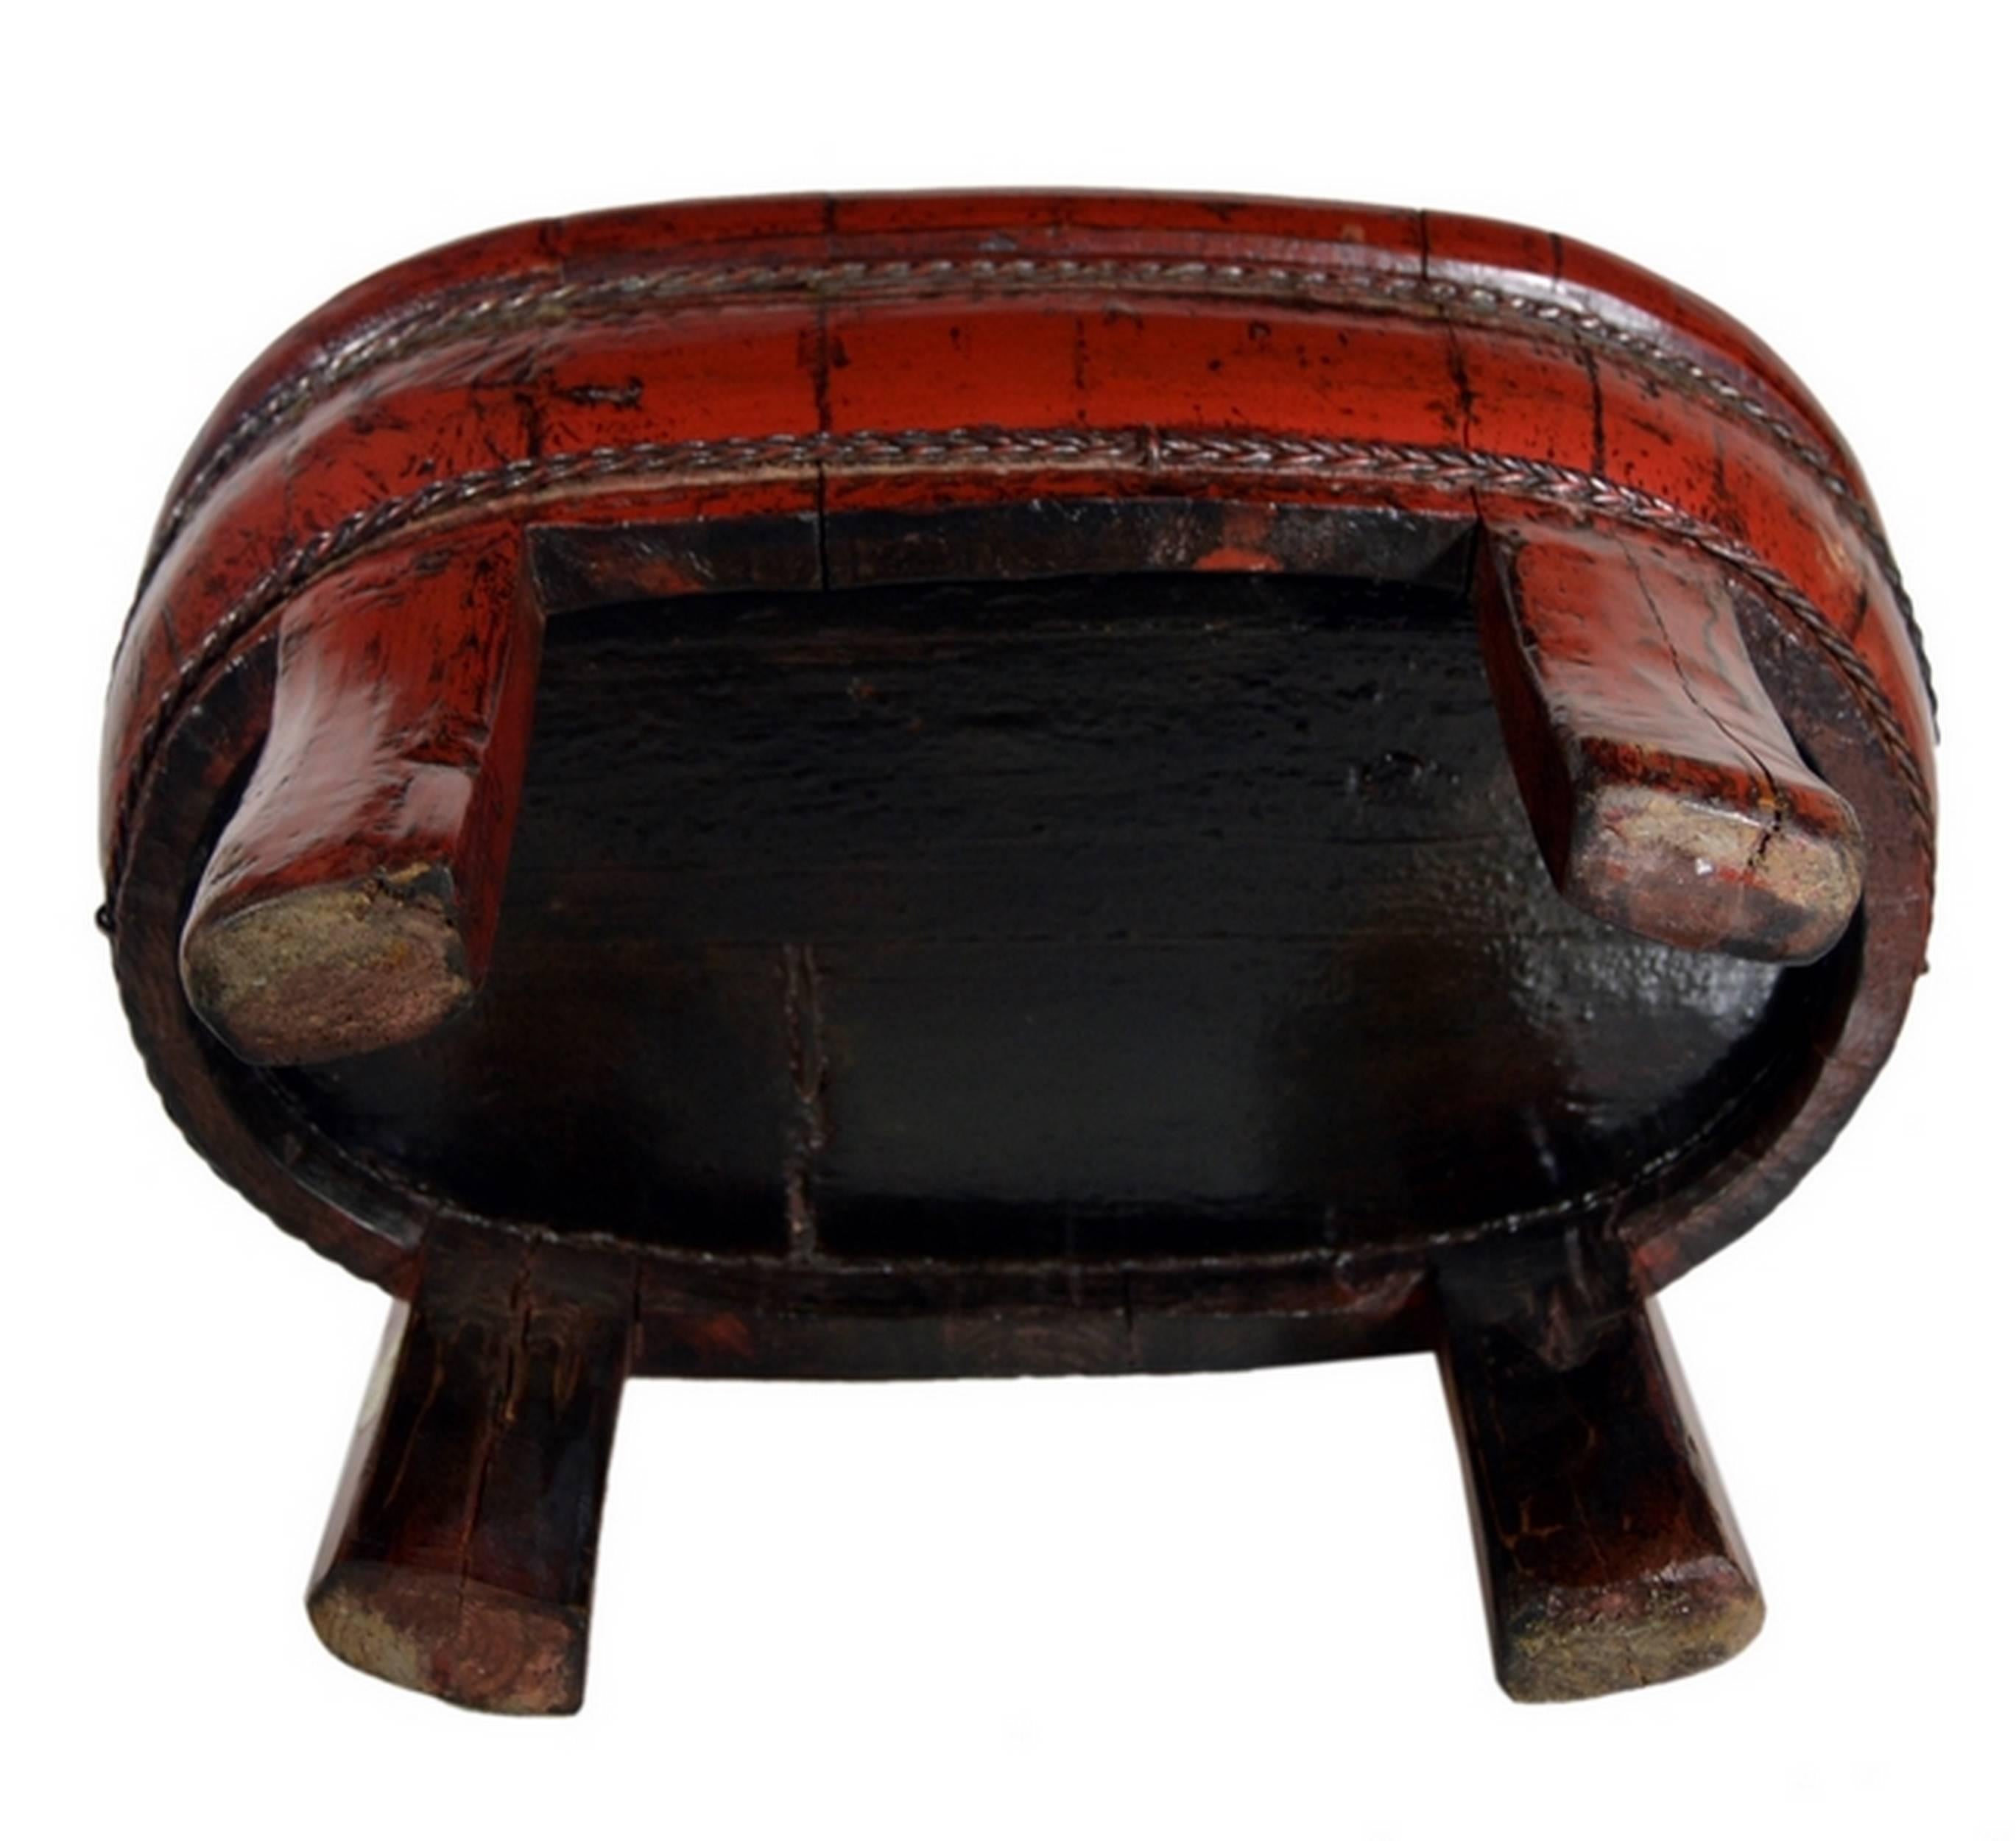 A Chinese 19th century legged bowl made with red lacquered wood and cords. This large oval bowl rests on four tall fine legs. Two cords adorn the belly and add faux support to the bowl. The bowl is largely made of red lacquered wood, except for the